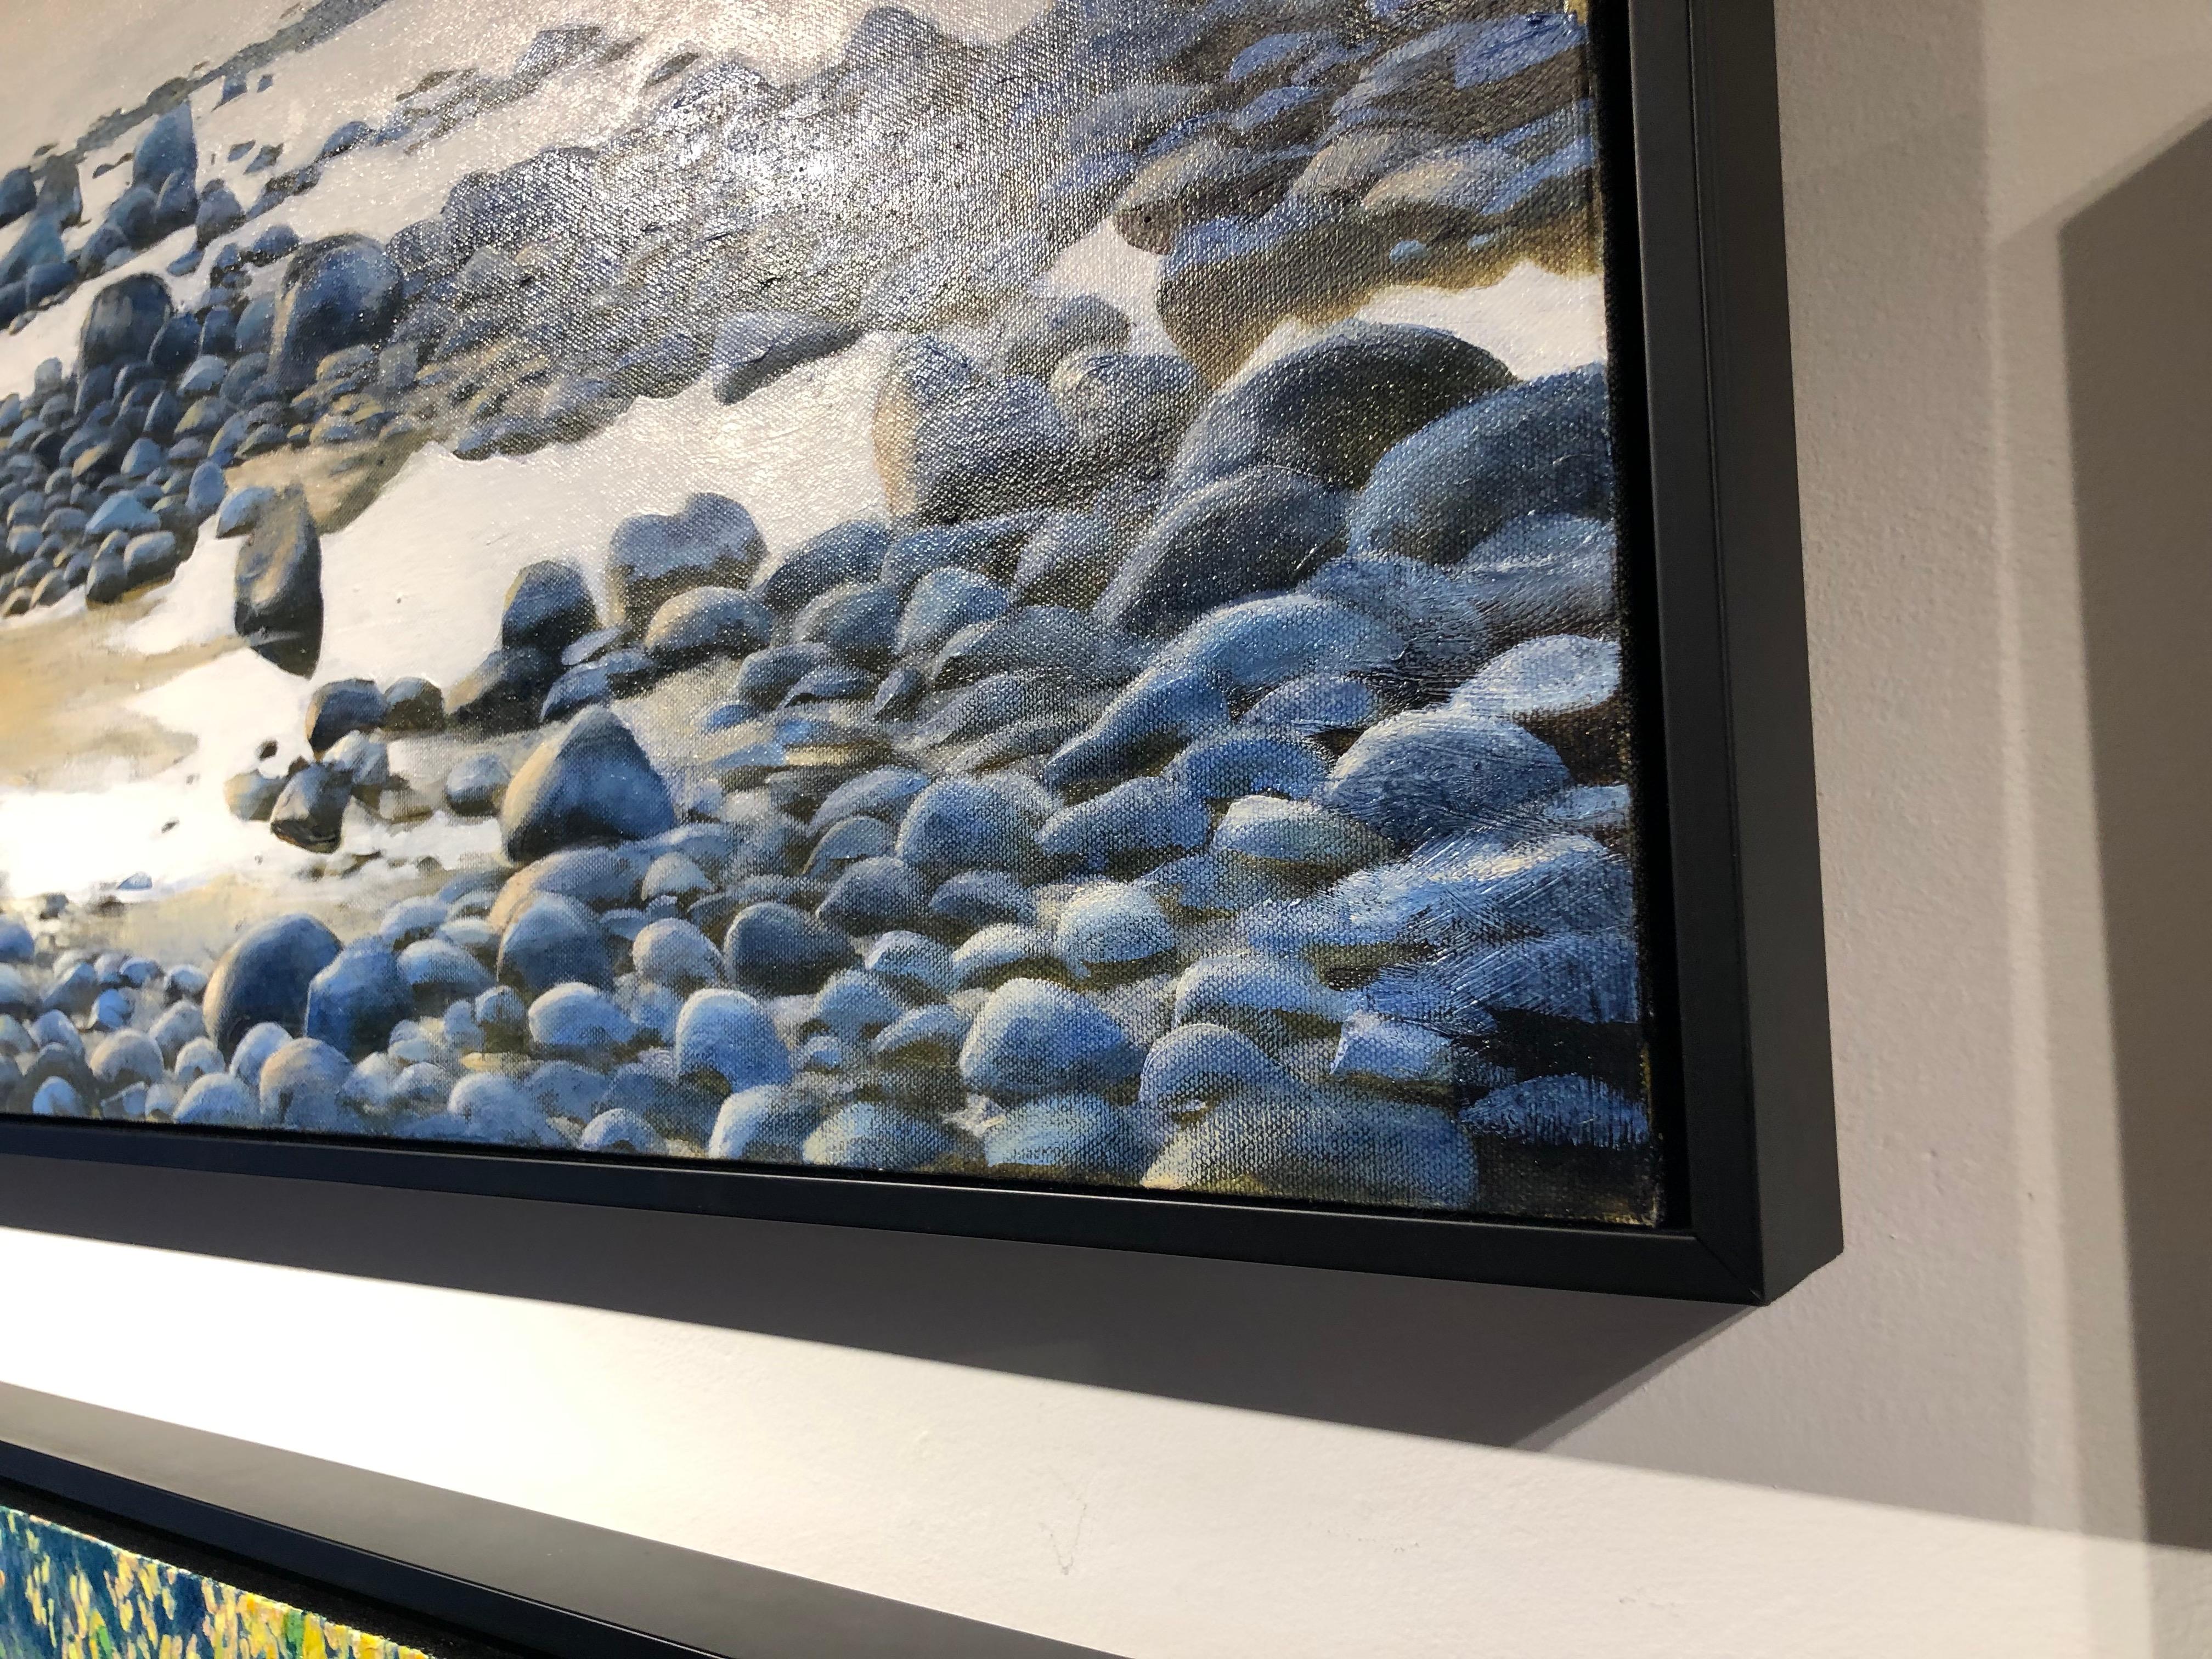 Going Blue - Original Oil on Canvas Painting with Water and Stones at the Shore 3